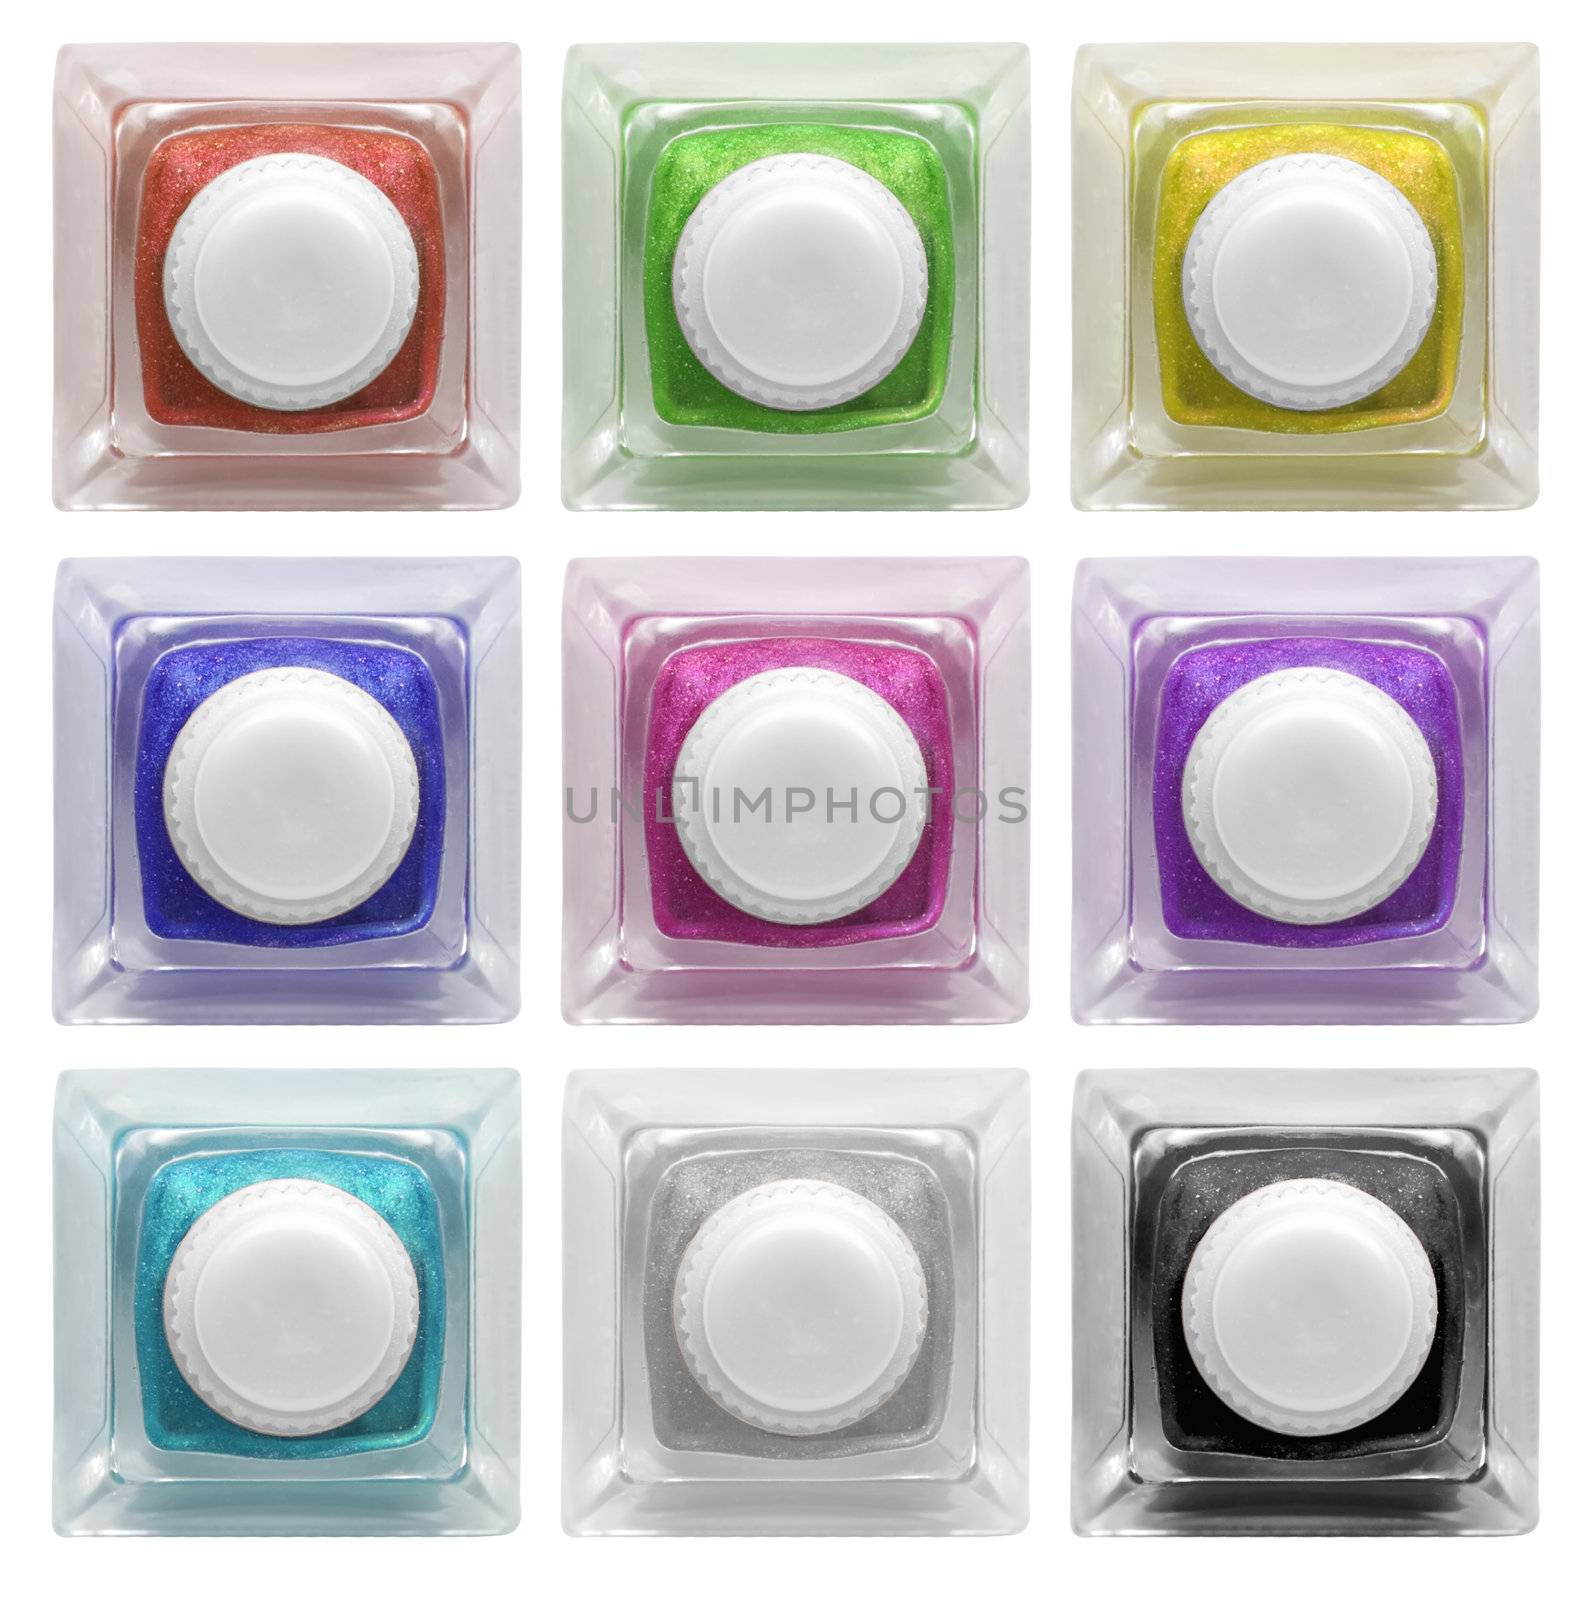 Real glass button collection  with colorful and blank space for text. Isolated on white background